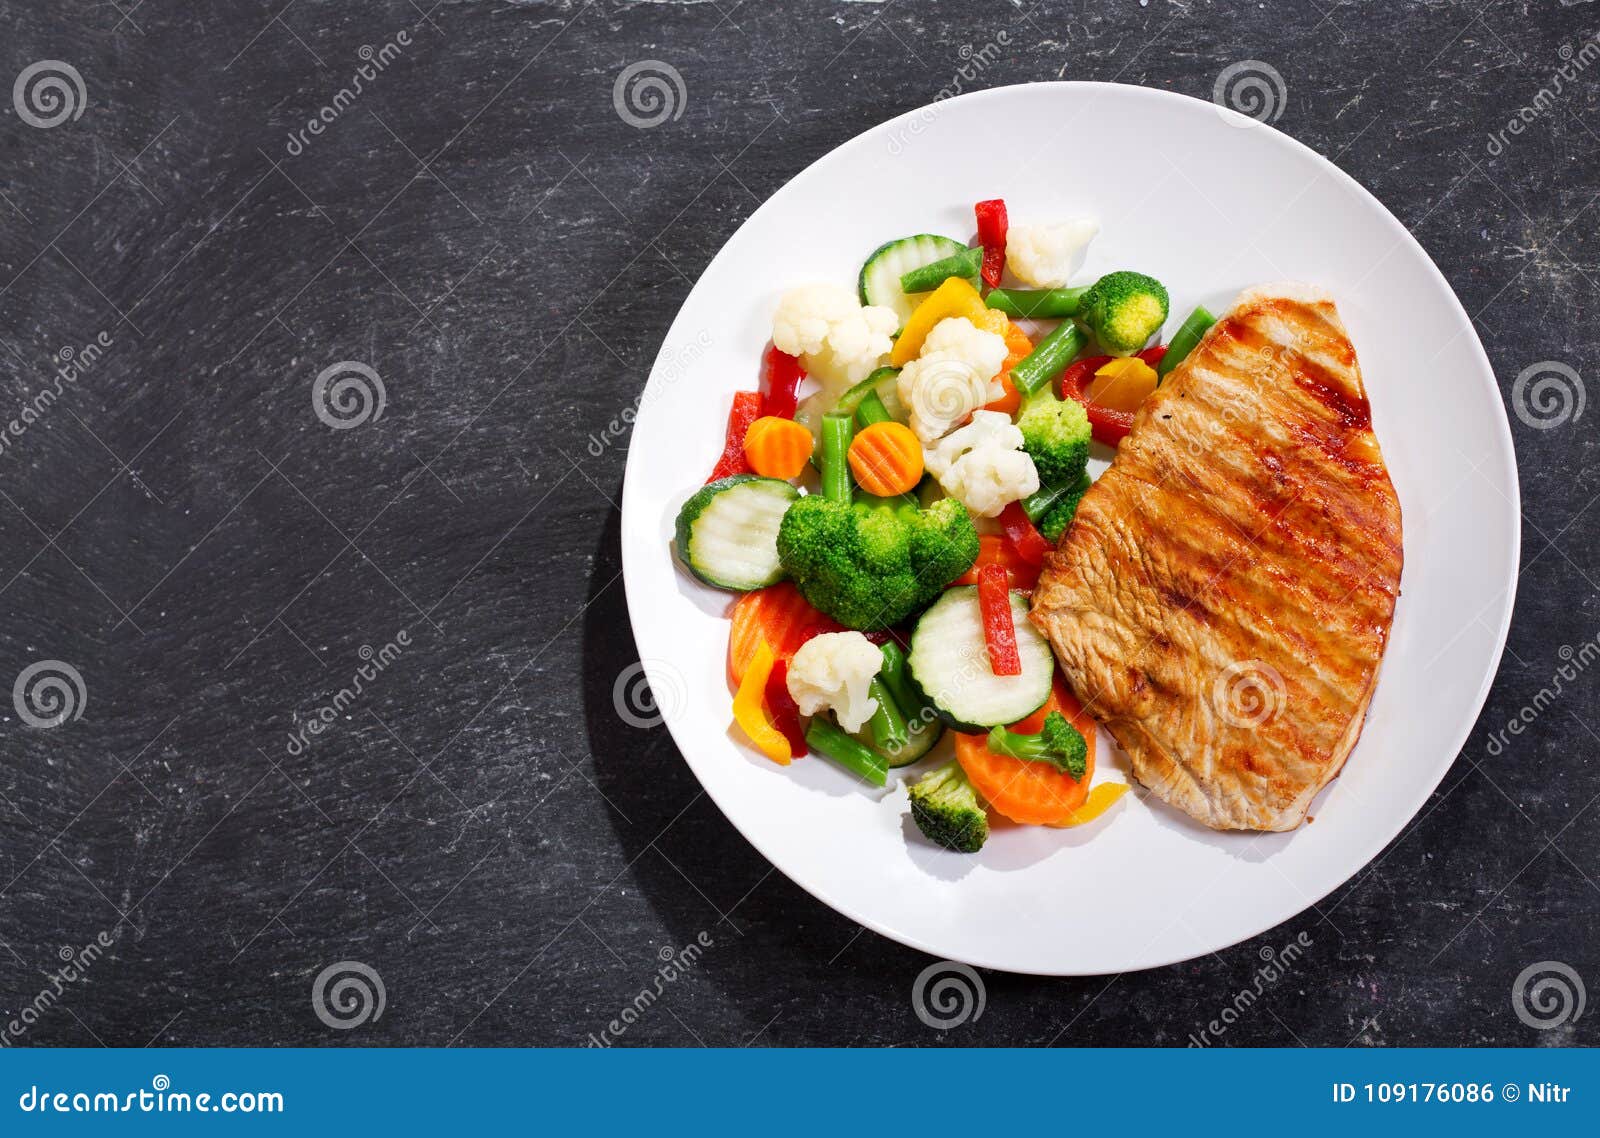 Plate of Grilled Chicken with Vegetables, Top View Stock Photo - Image ...